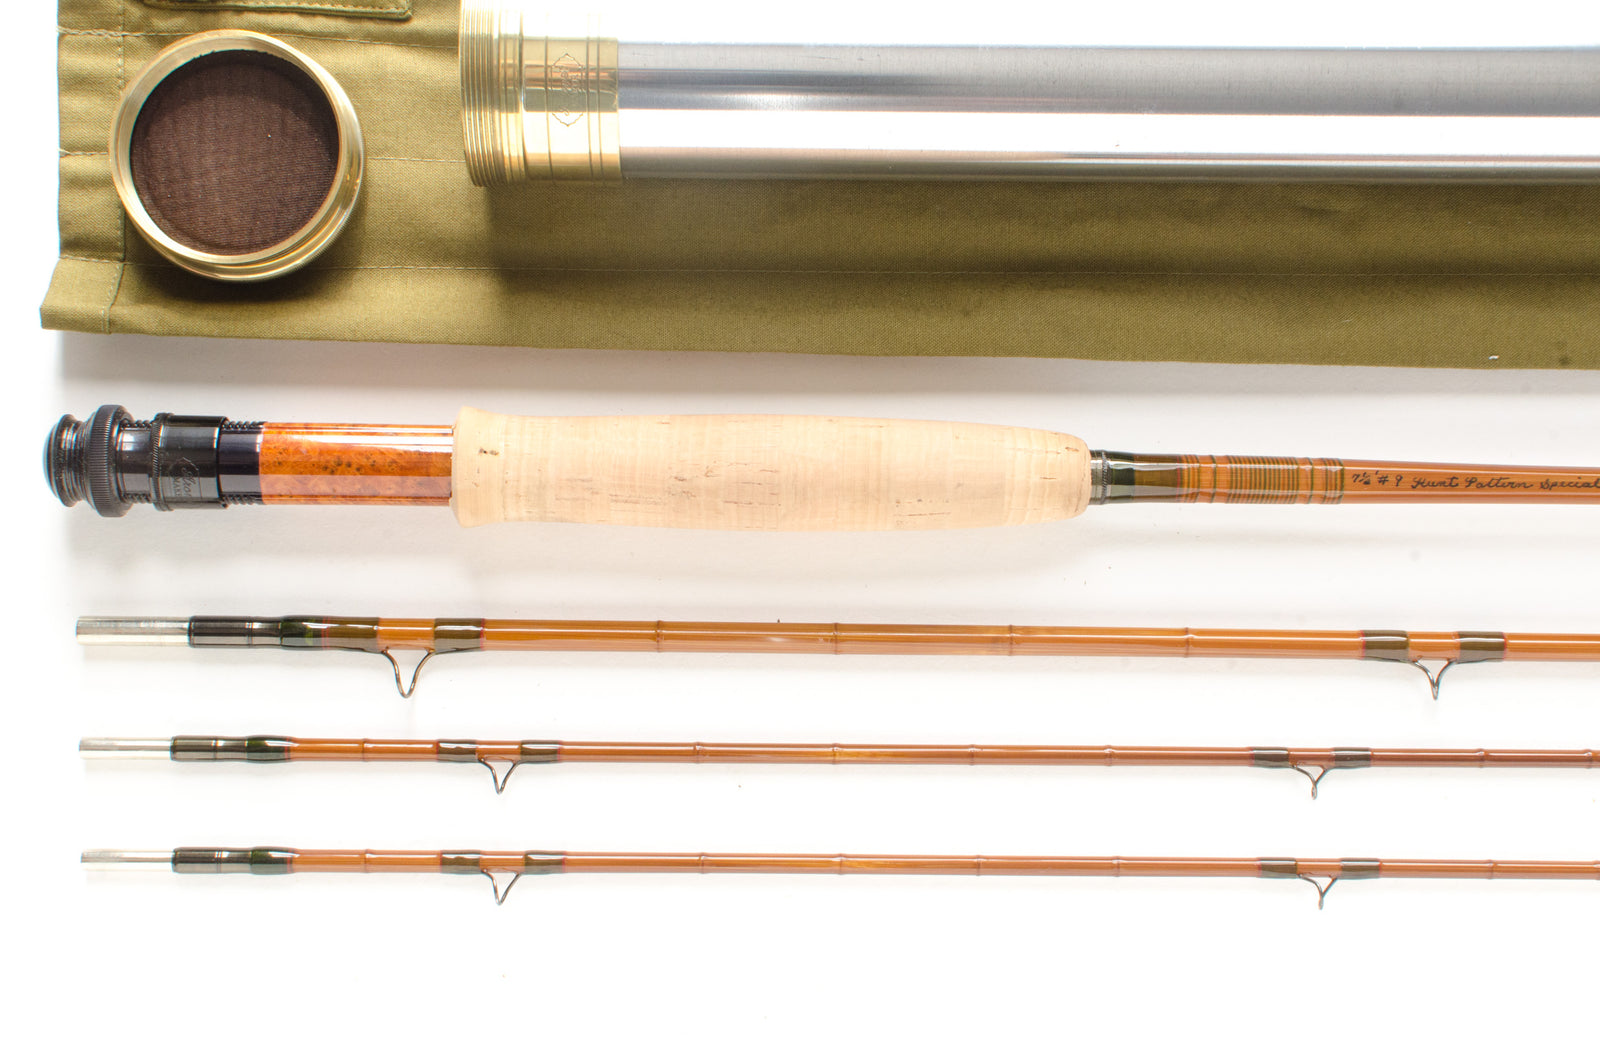 SOLD - Bamboo Salmon Rod 10'6” Montague Manitou Dry Fly Salmon